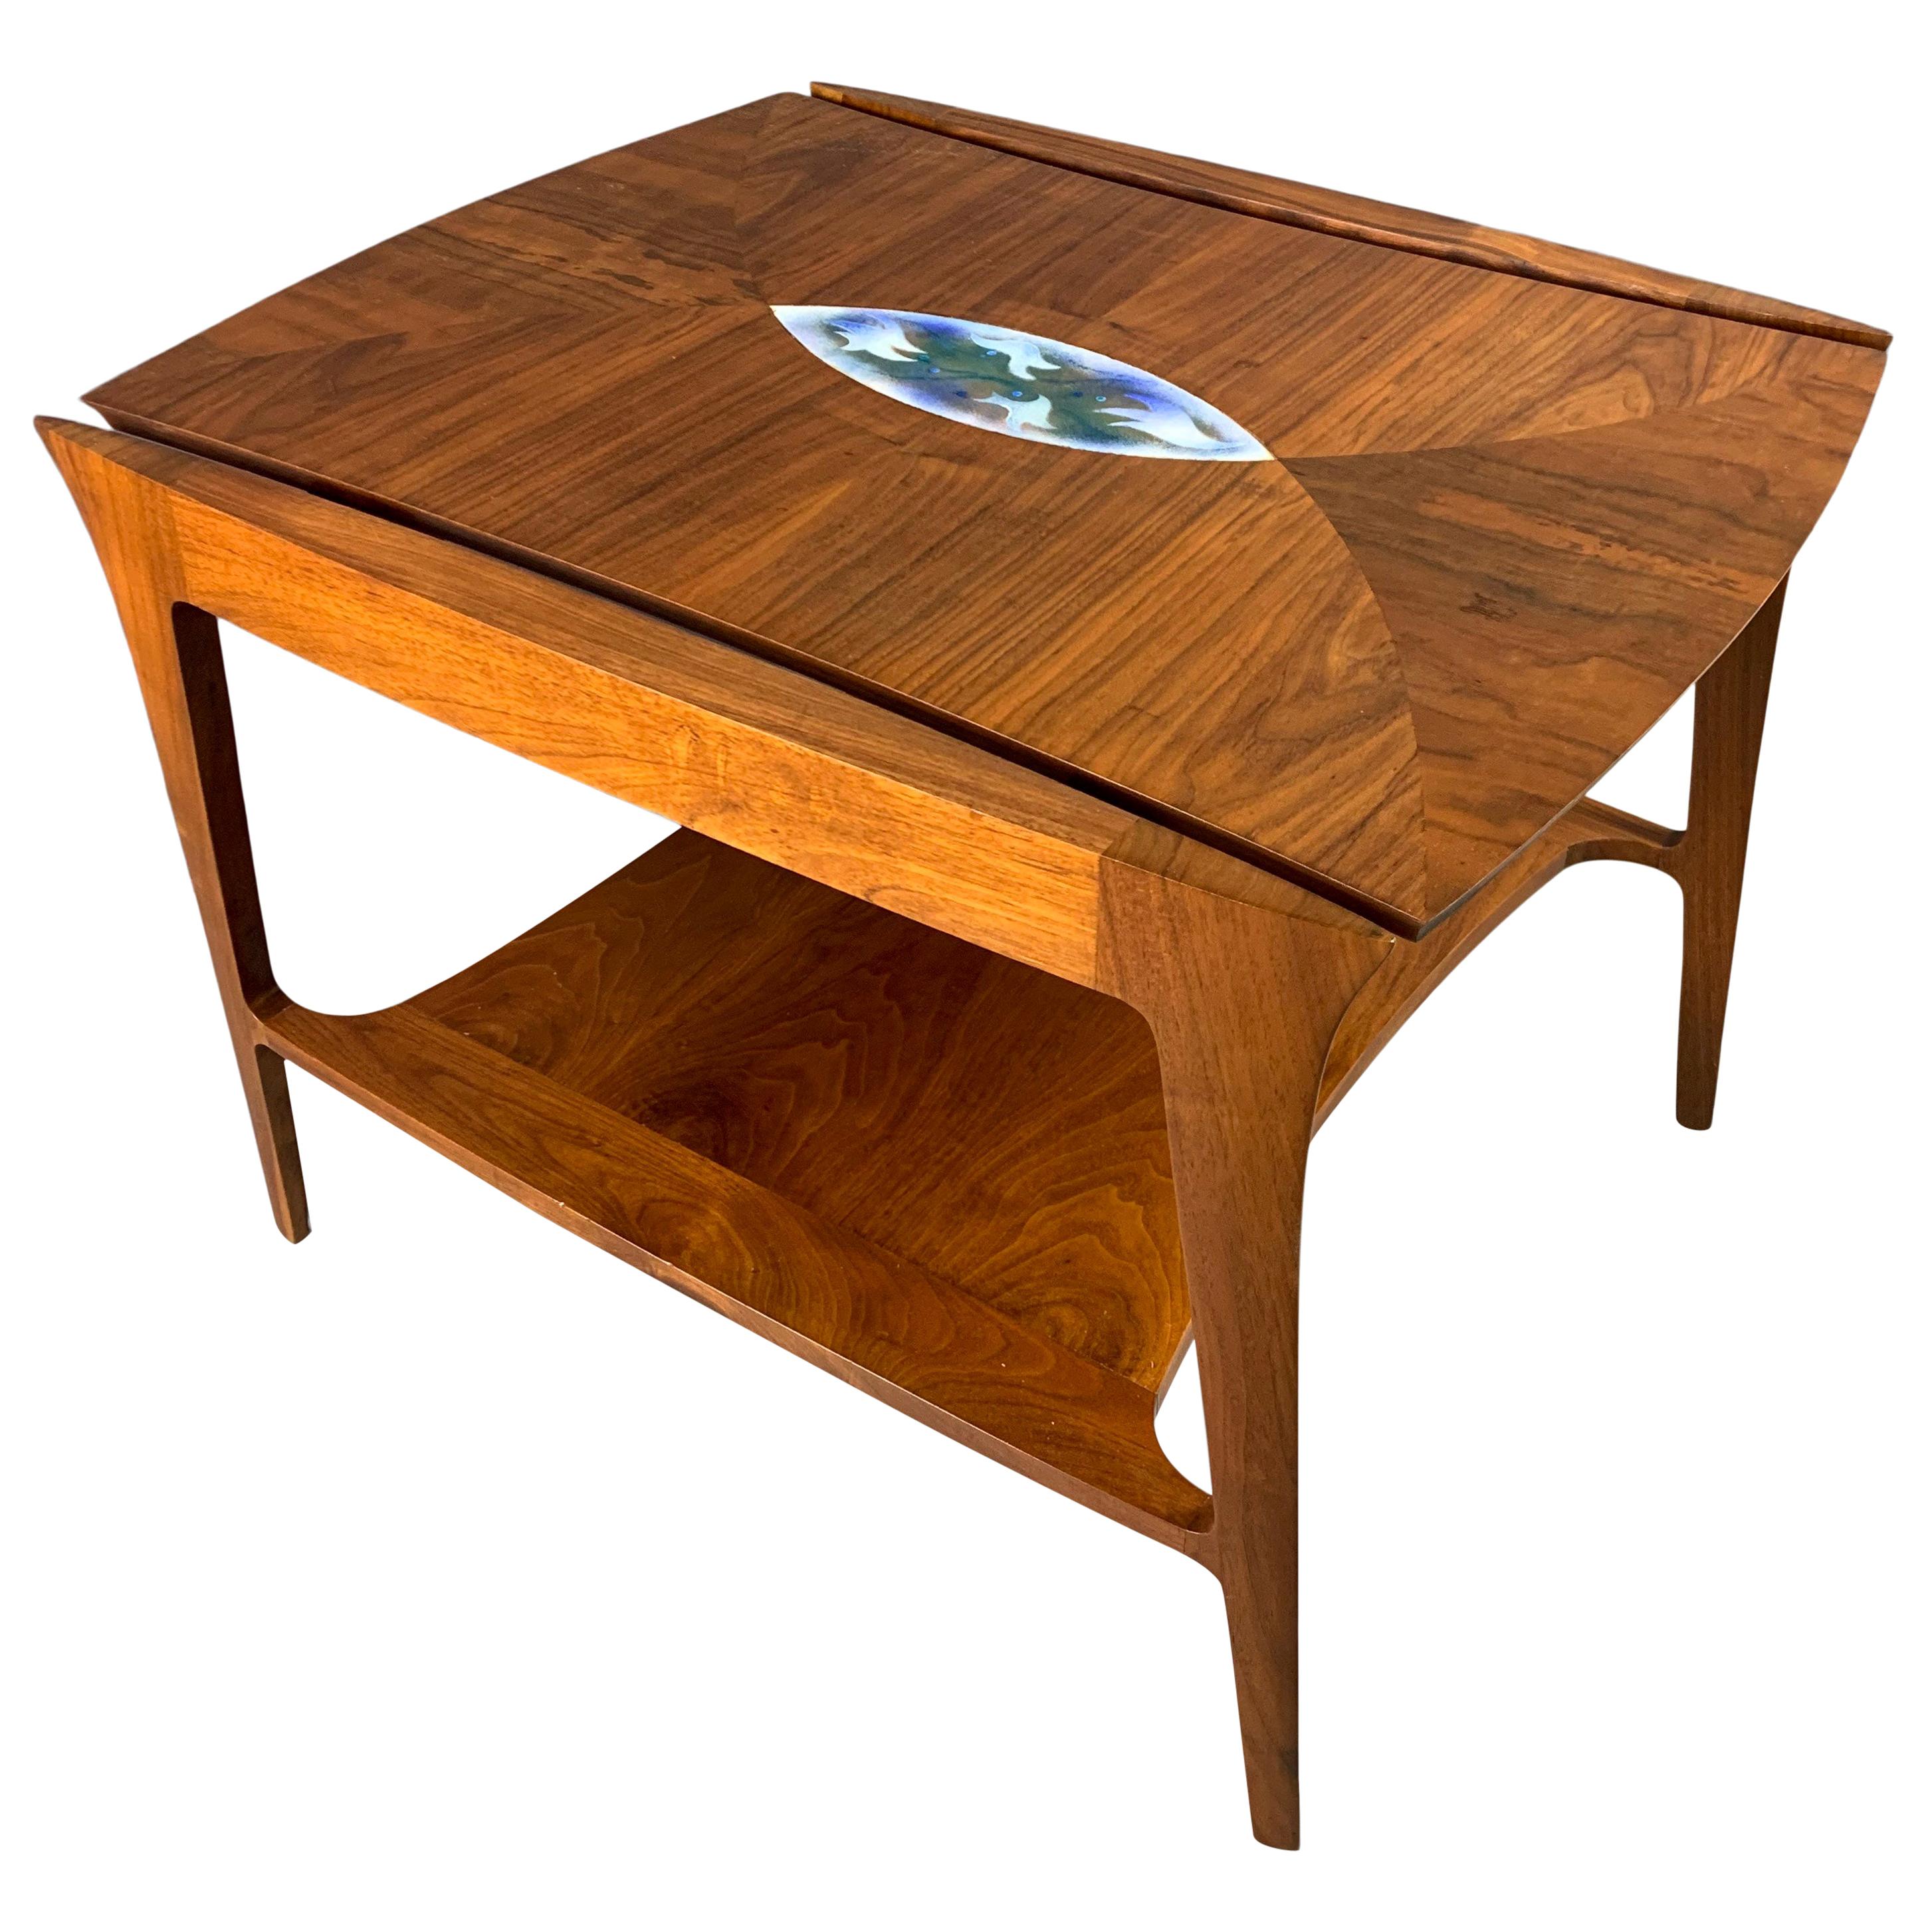 Danish Midcentury Walnut Sculpted Side Table with Enameled Insert of Birds